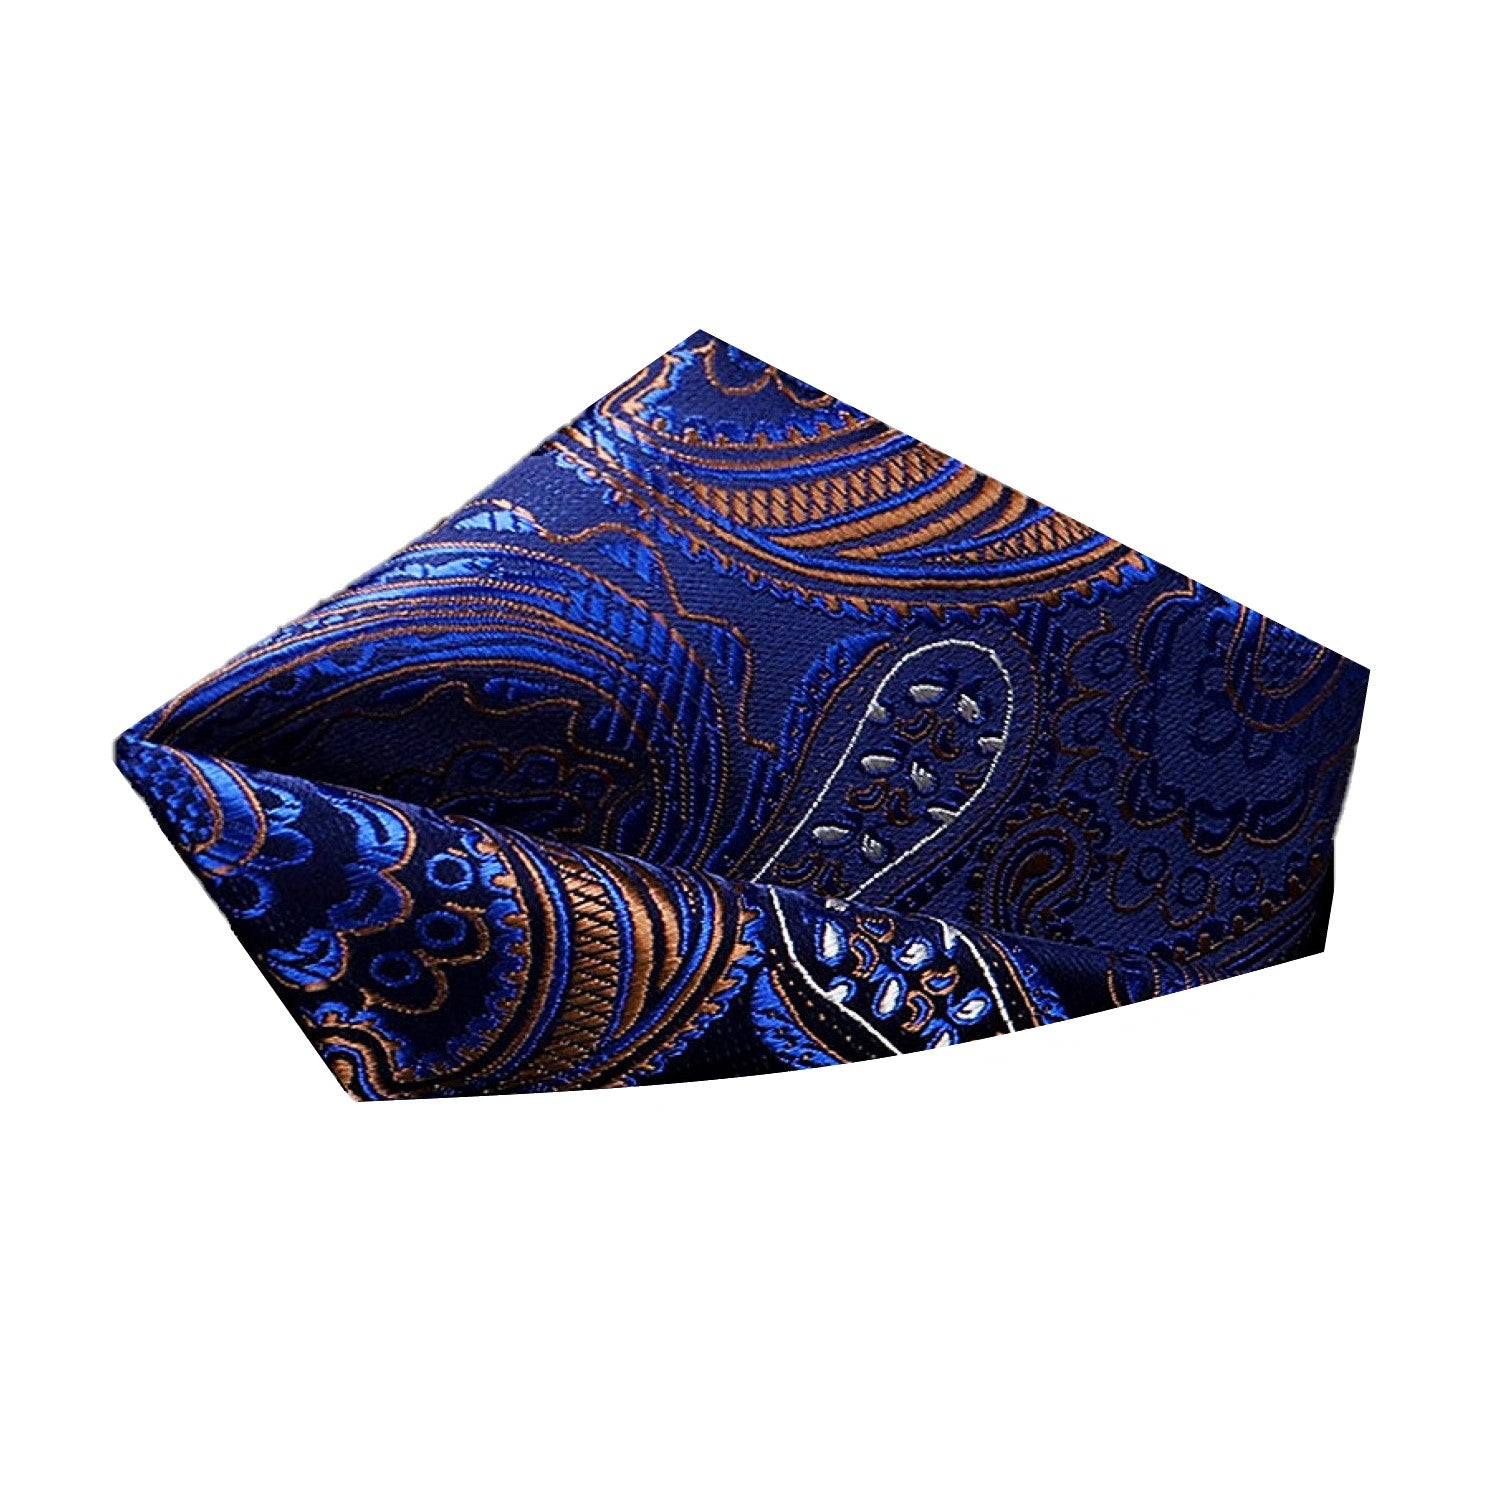 View 2: Blue, Golden Brown Paisley Pocket Square